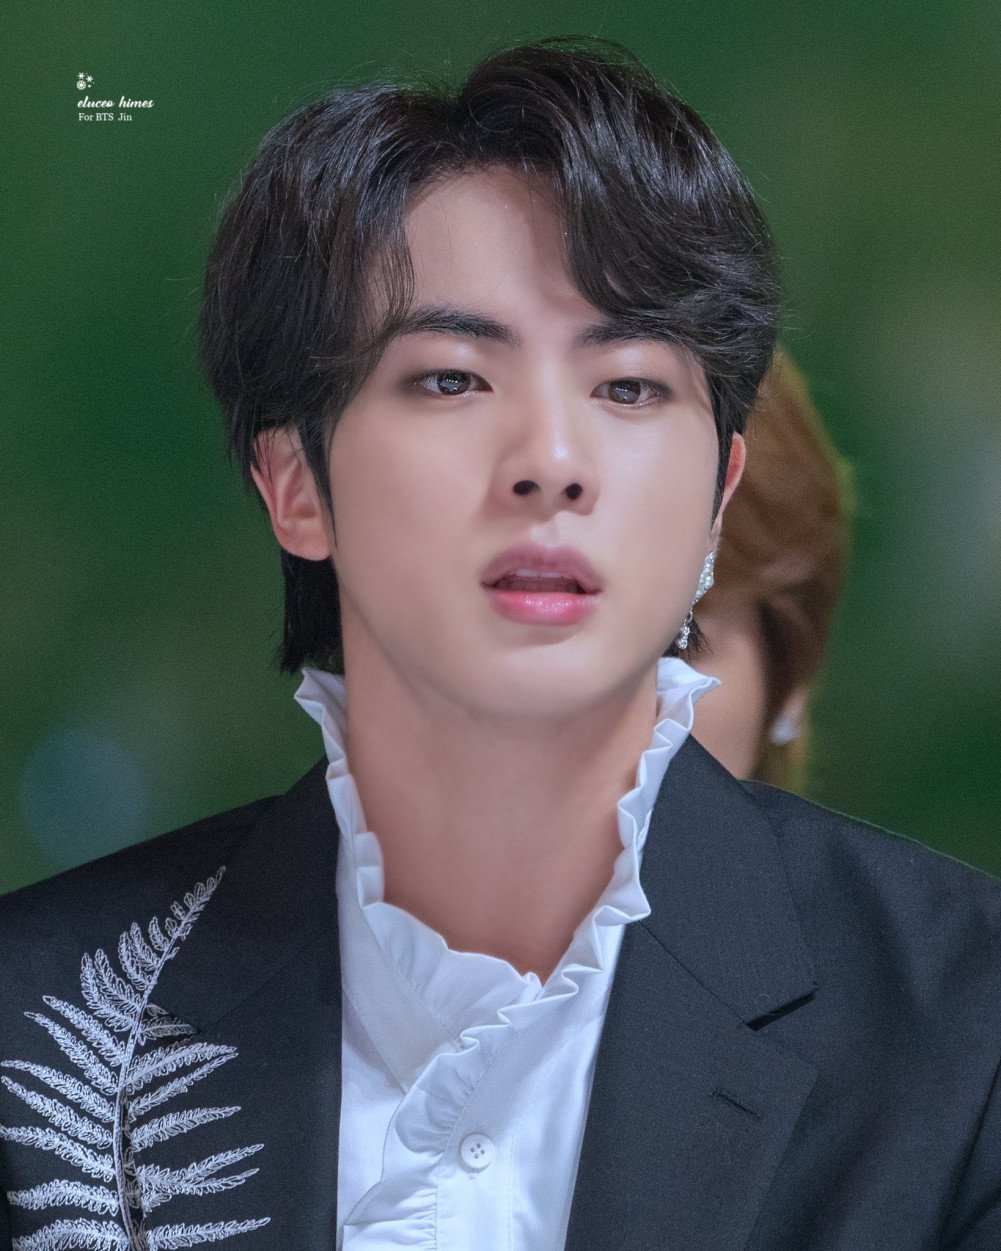 Knetizens react to BTS's Jin being Worldwide Handsome even in his childhood picture